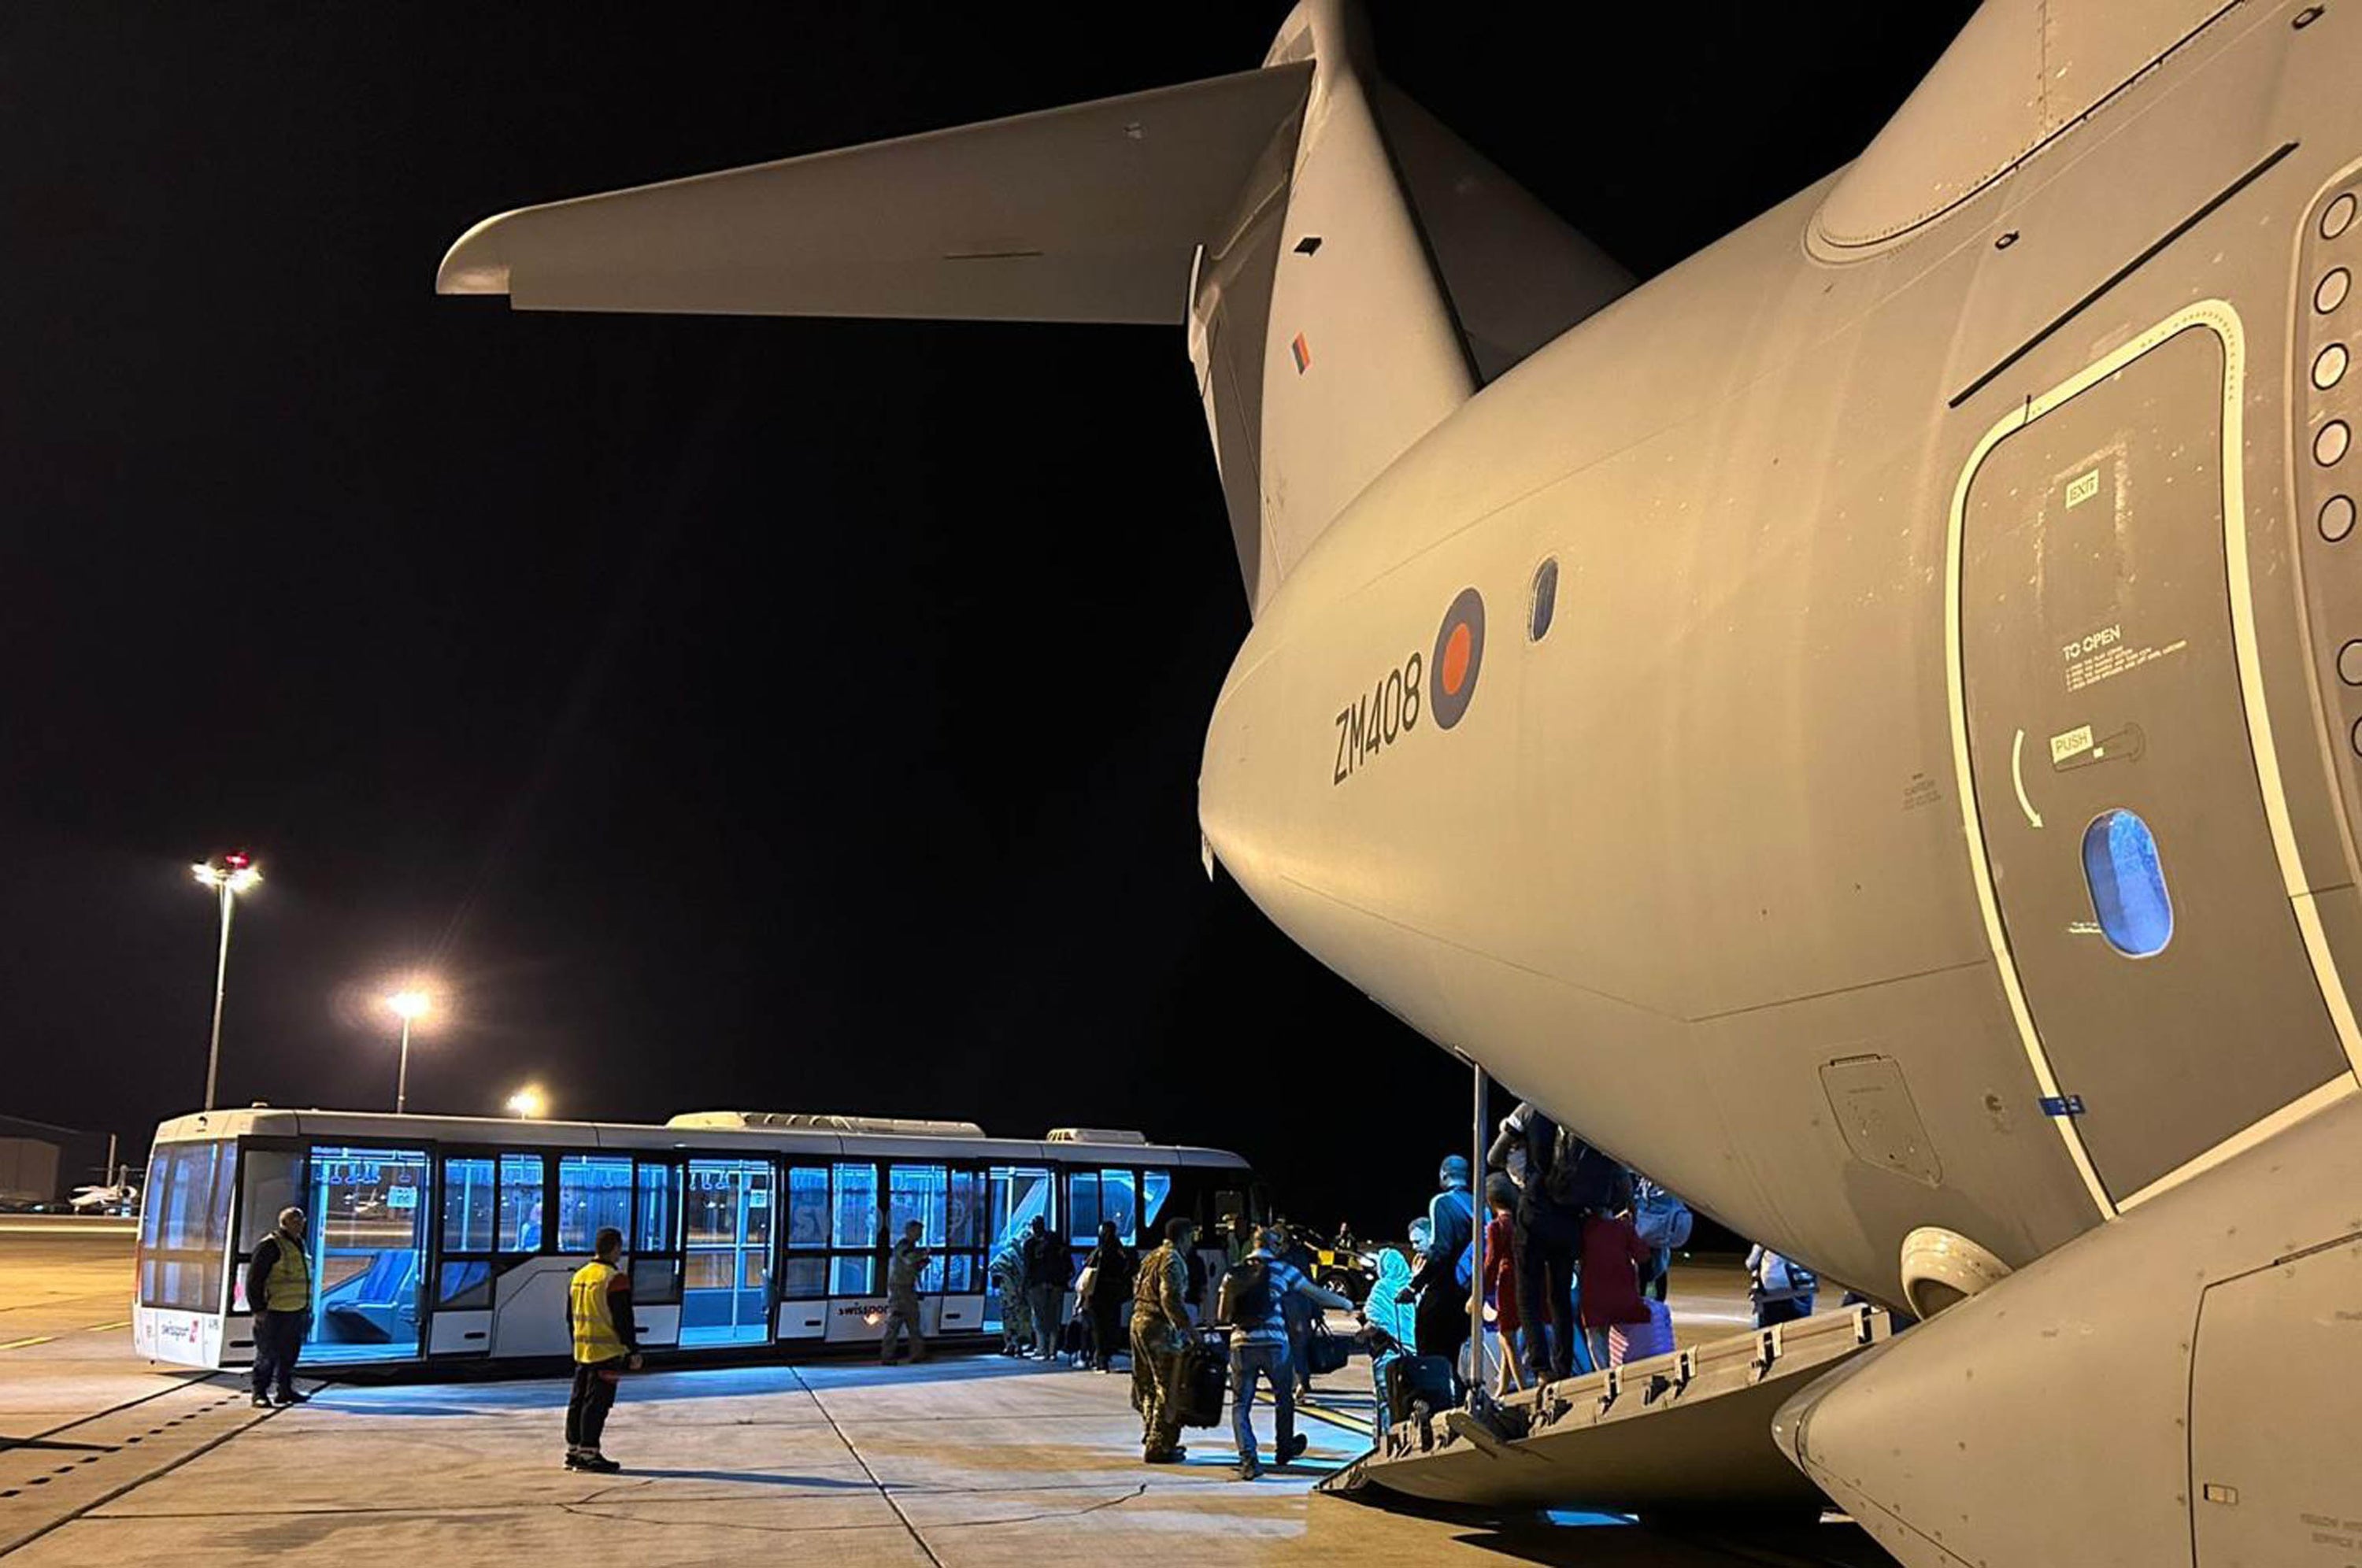 Following an agreed 72-hour ceasefire, the British government has begun evacuation flights from Sudan for those with British passports